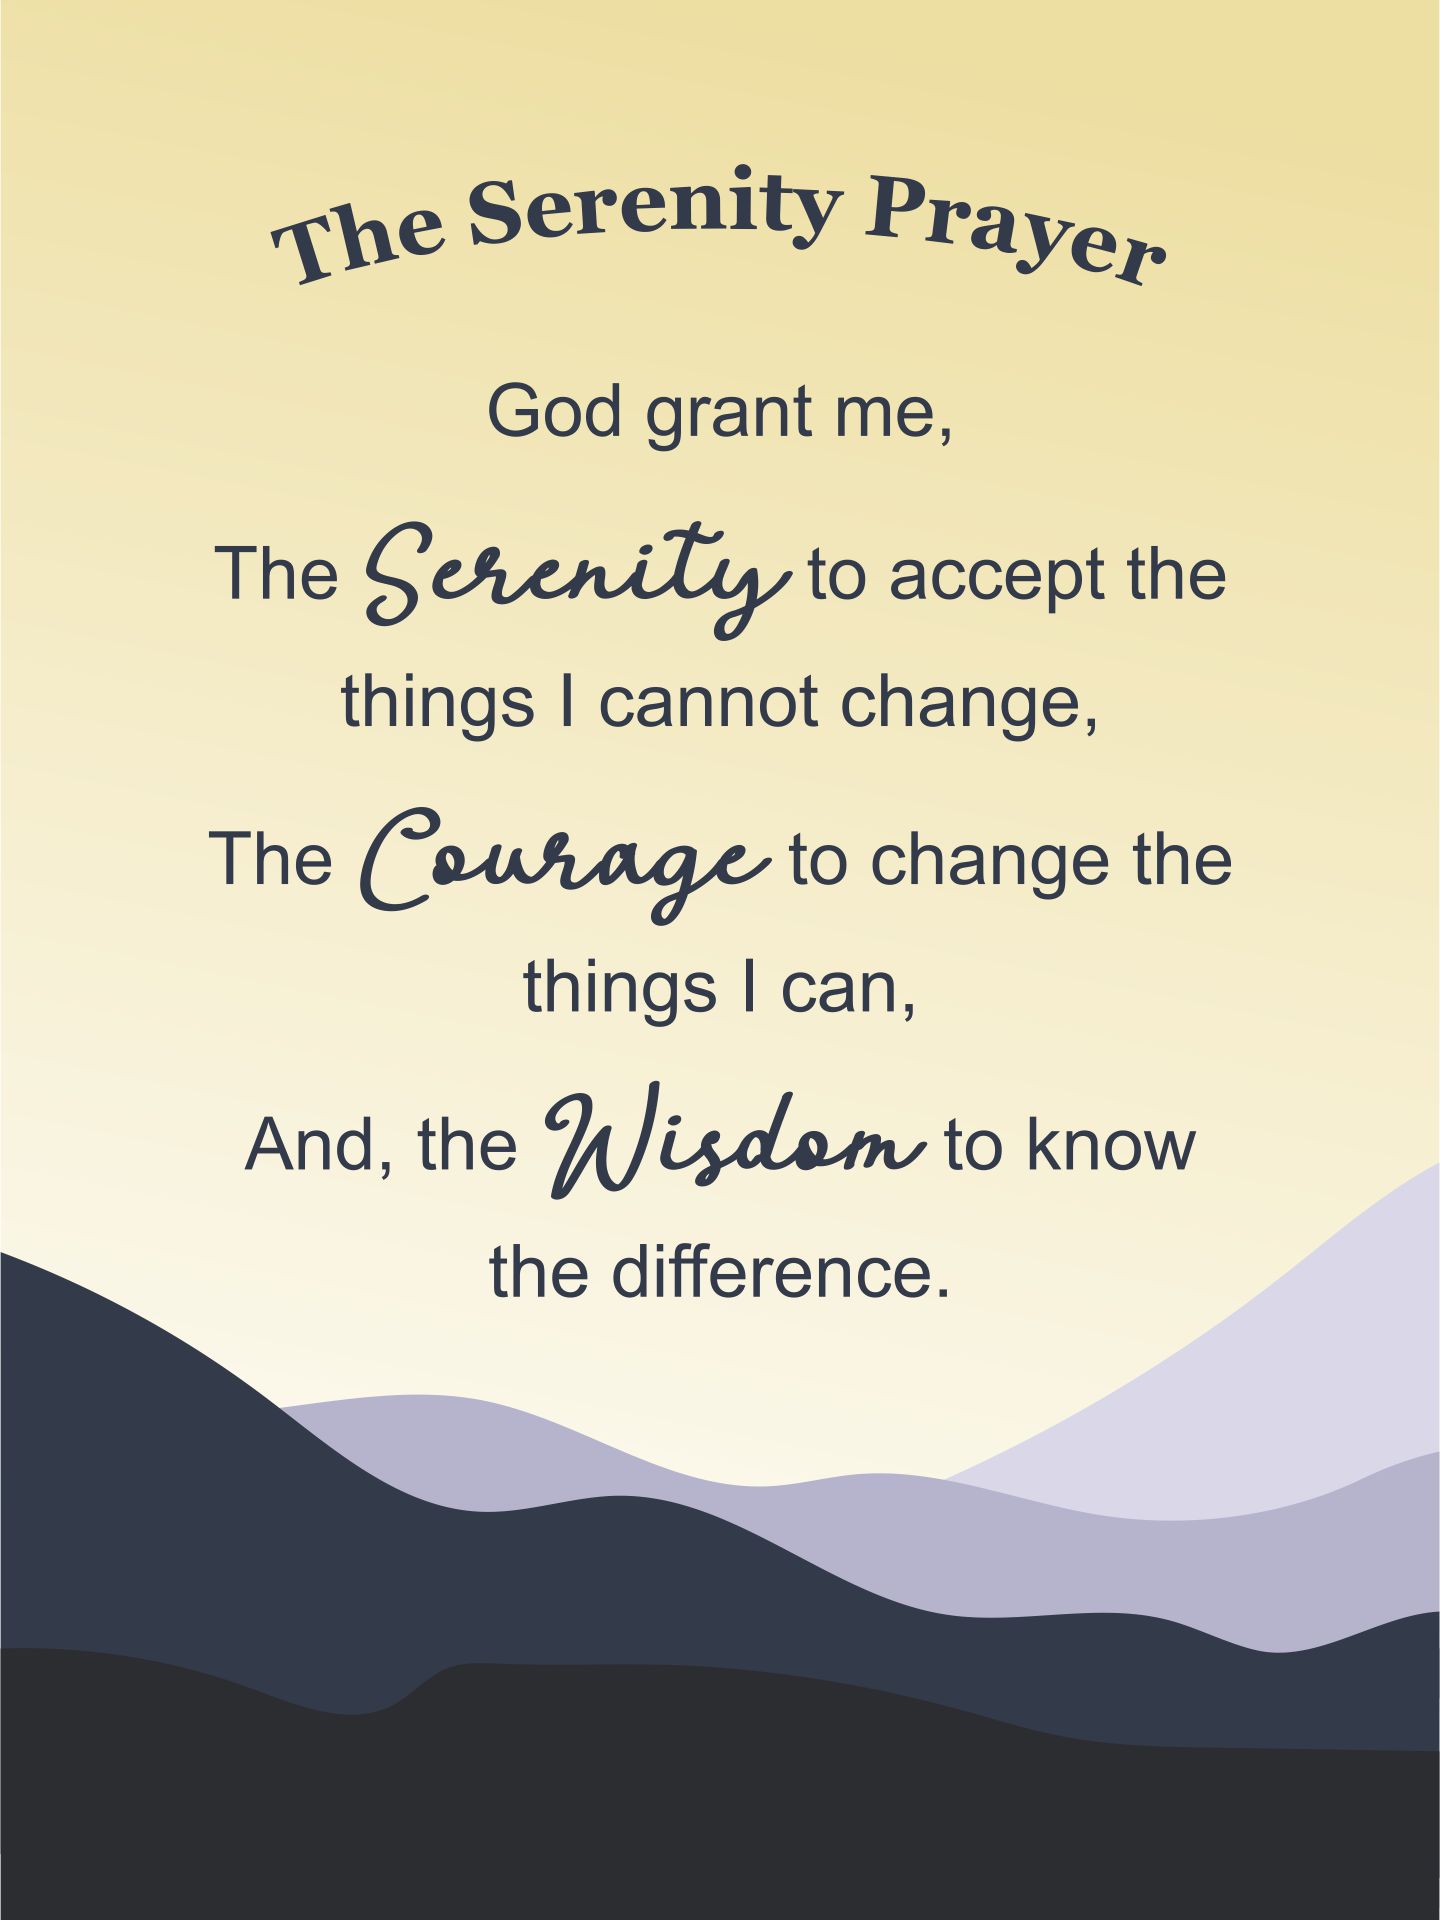 9 Best Images Of The Serenity Prayer Printable Version Serenity - Vrogue